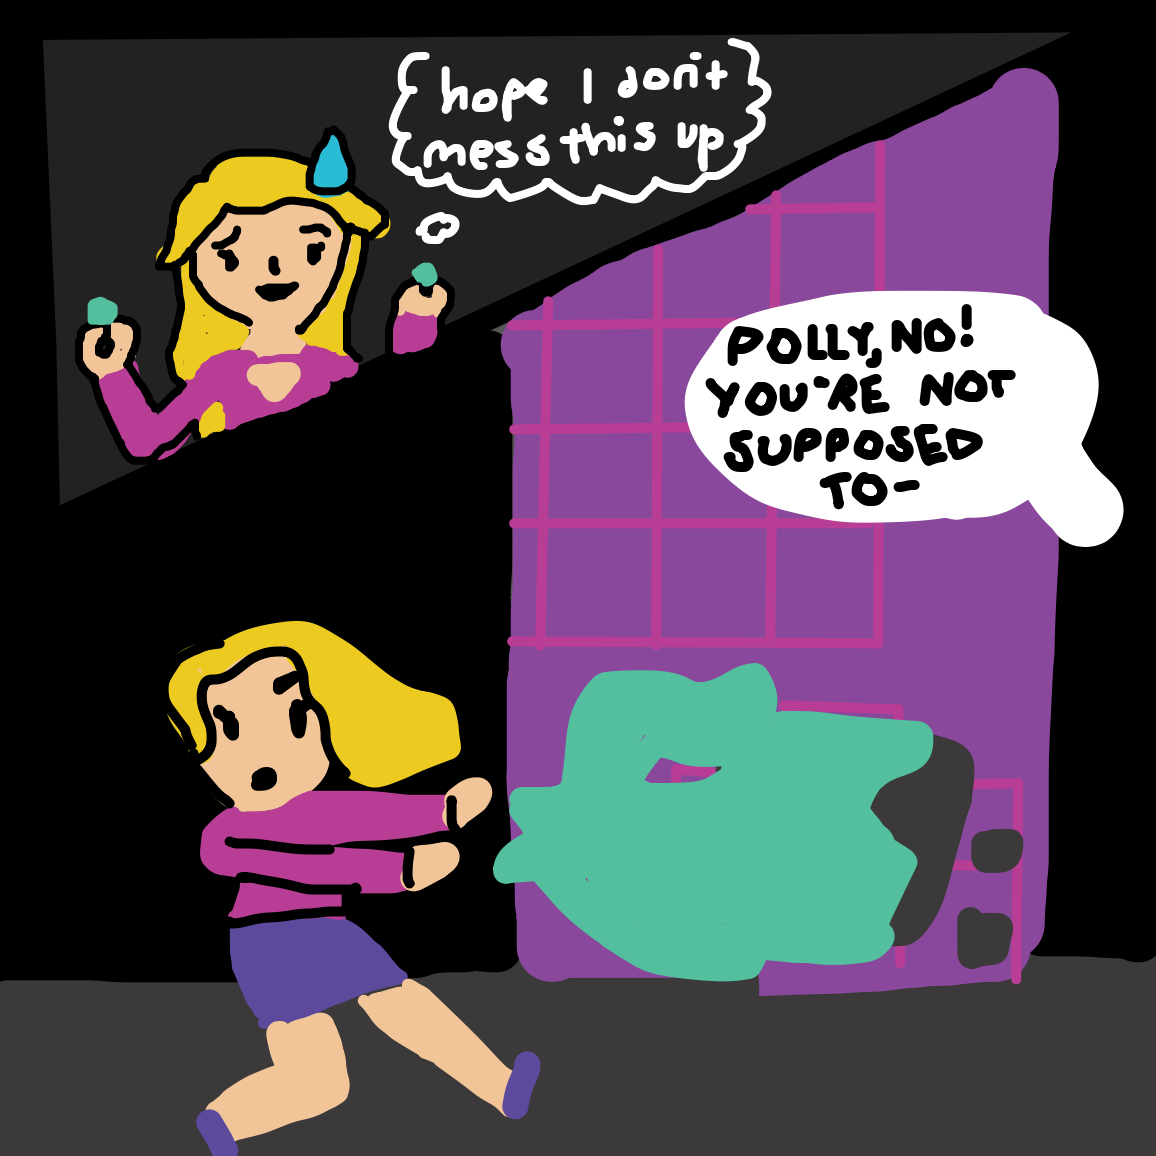 let's make Polly the newbie! - Online Drawing Game Comic Strip Panel by unfortunate fool